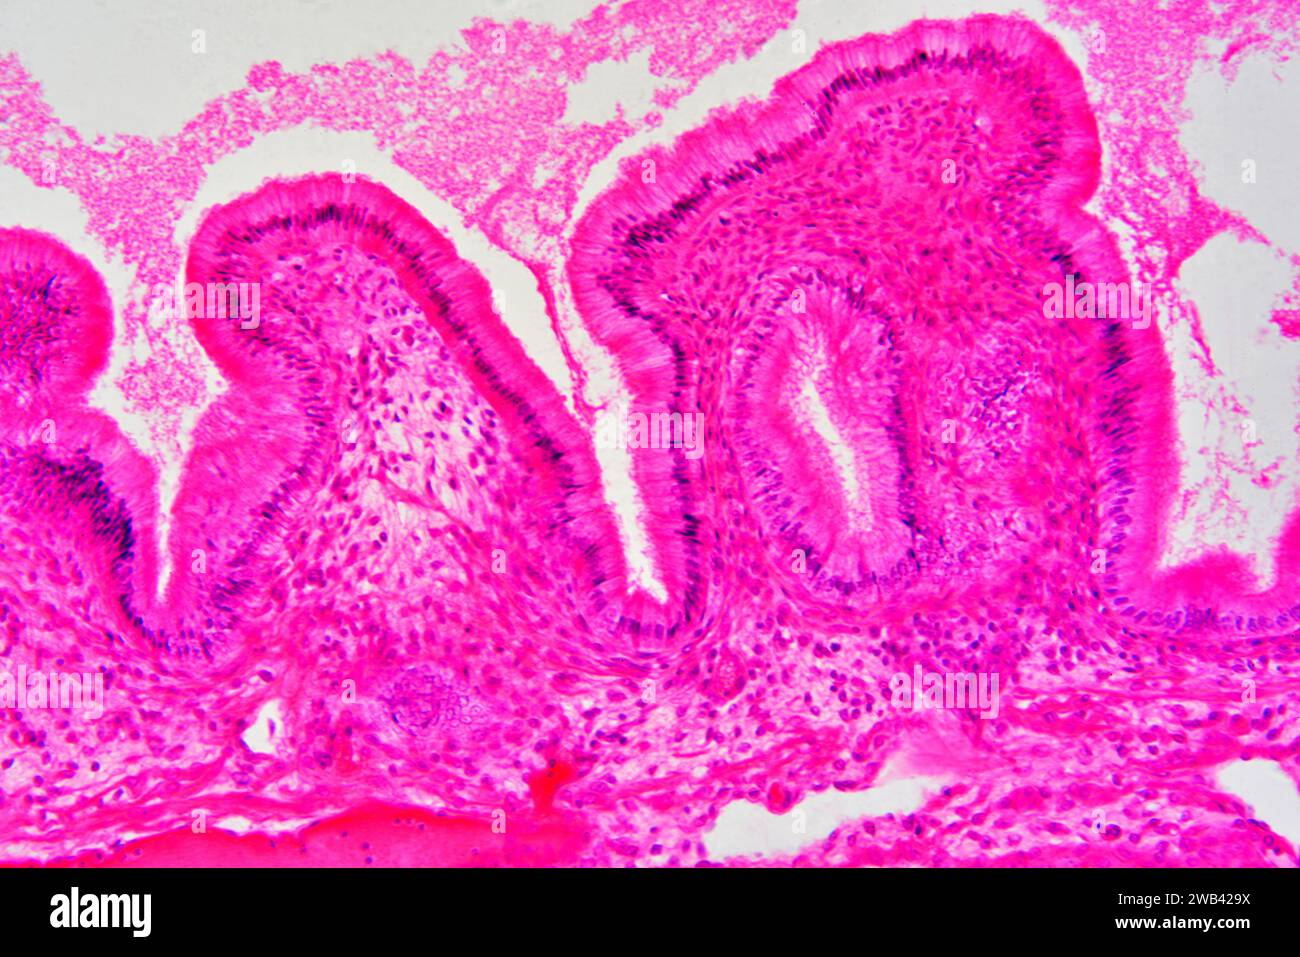 Gallbladder wall showing columnar epithelium with mucosal folds, connective tissue and smooth muscle fibers. Photomicrograph X150 at 10cm wide. Stock Photo